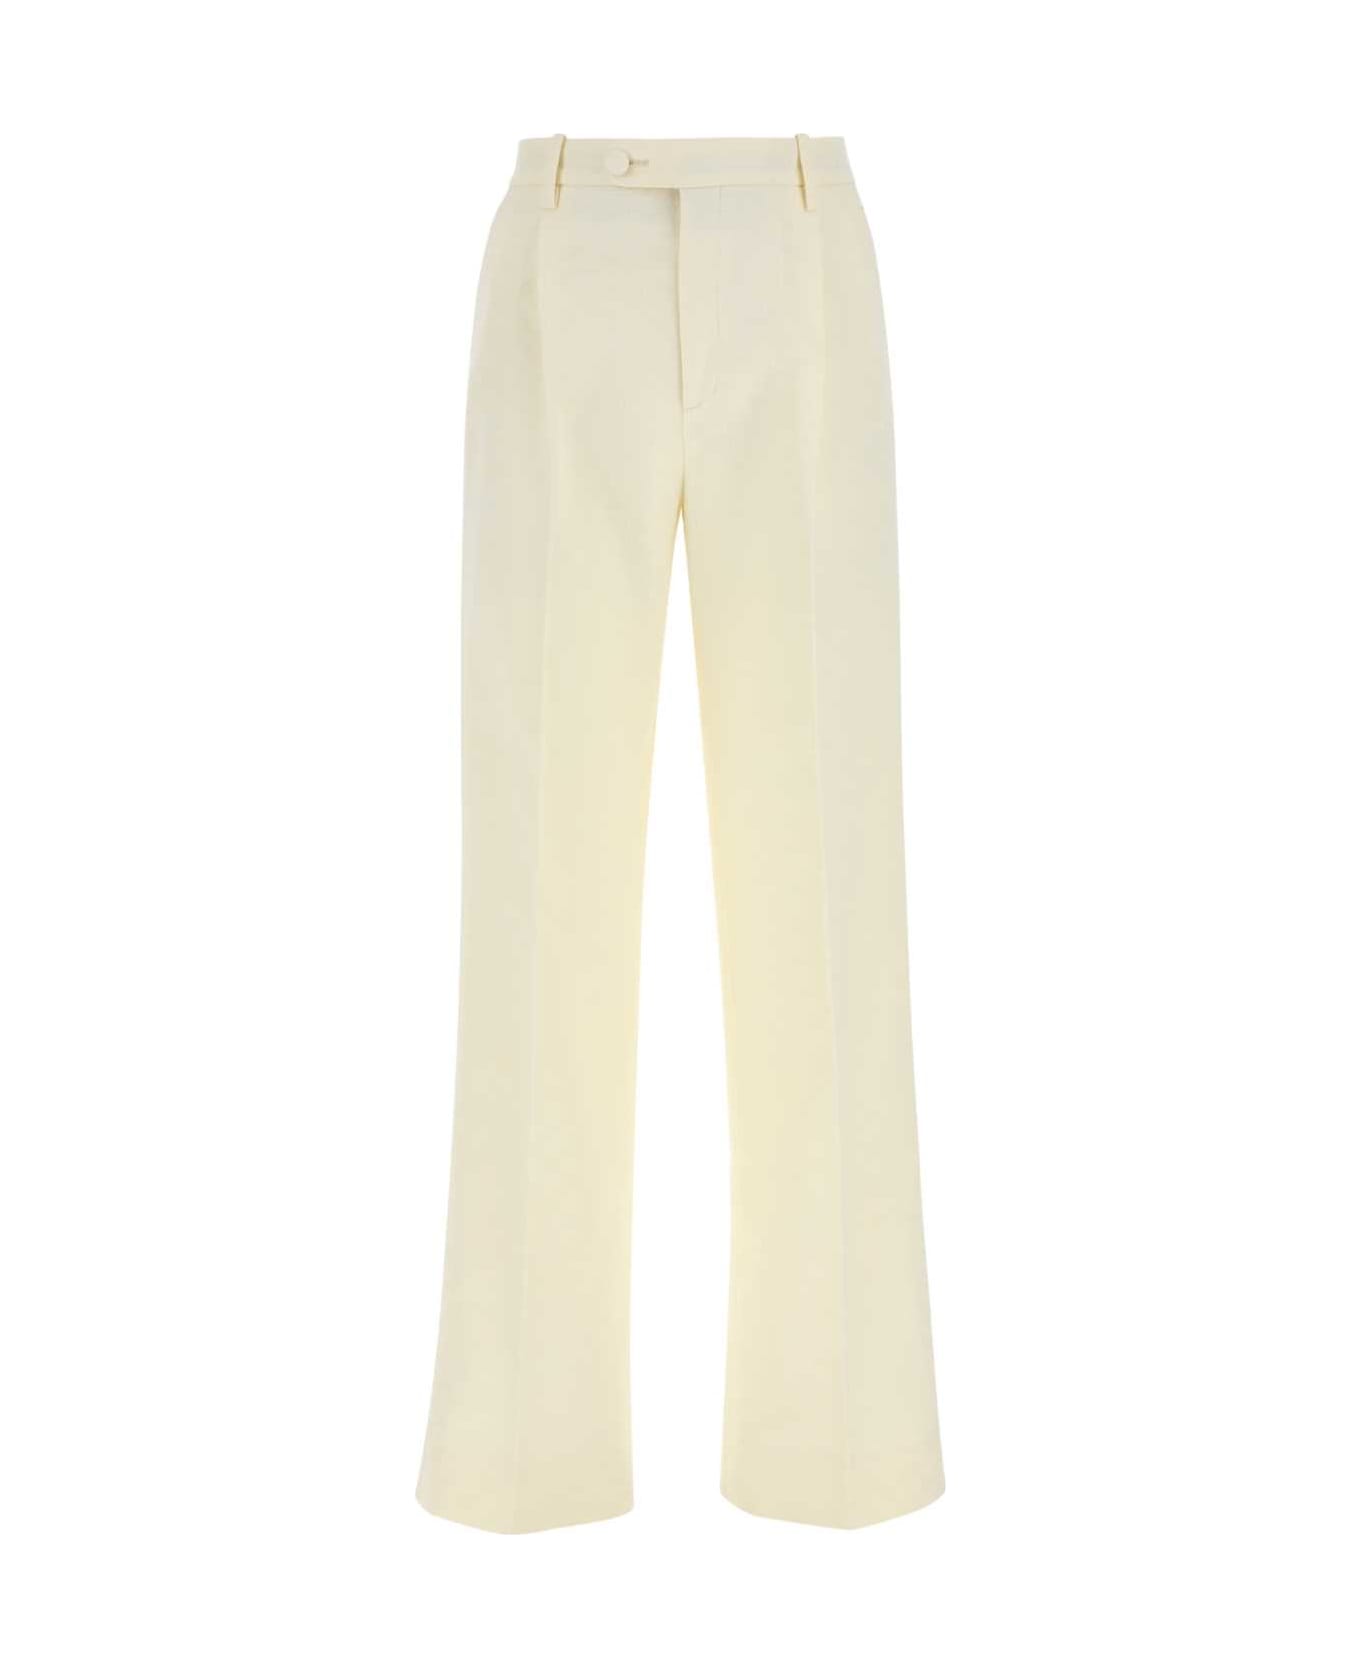 Gucci Embroidered Cotton Blend Wide-leg Pant - Beige